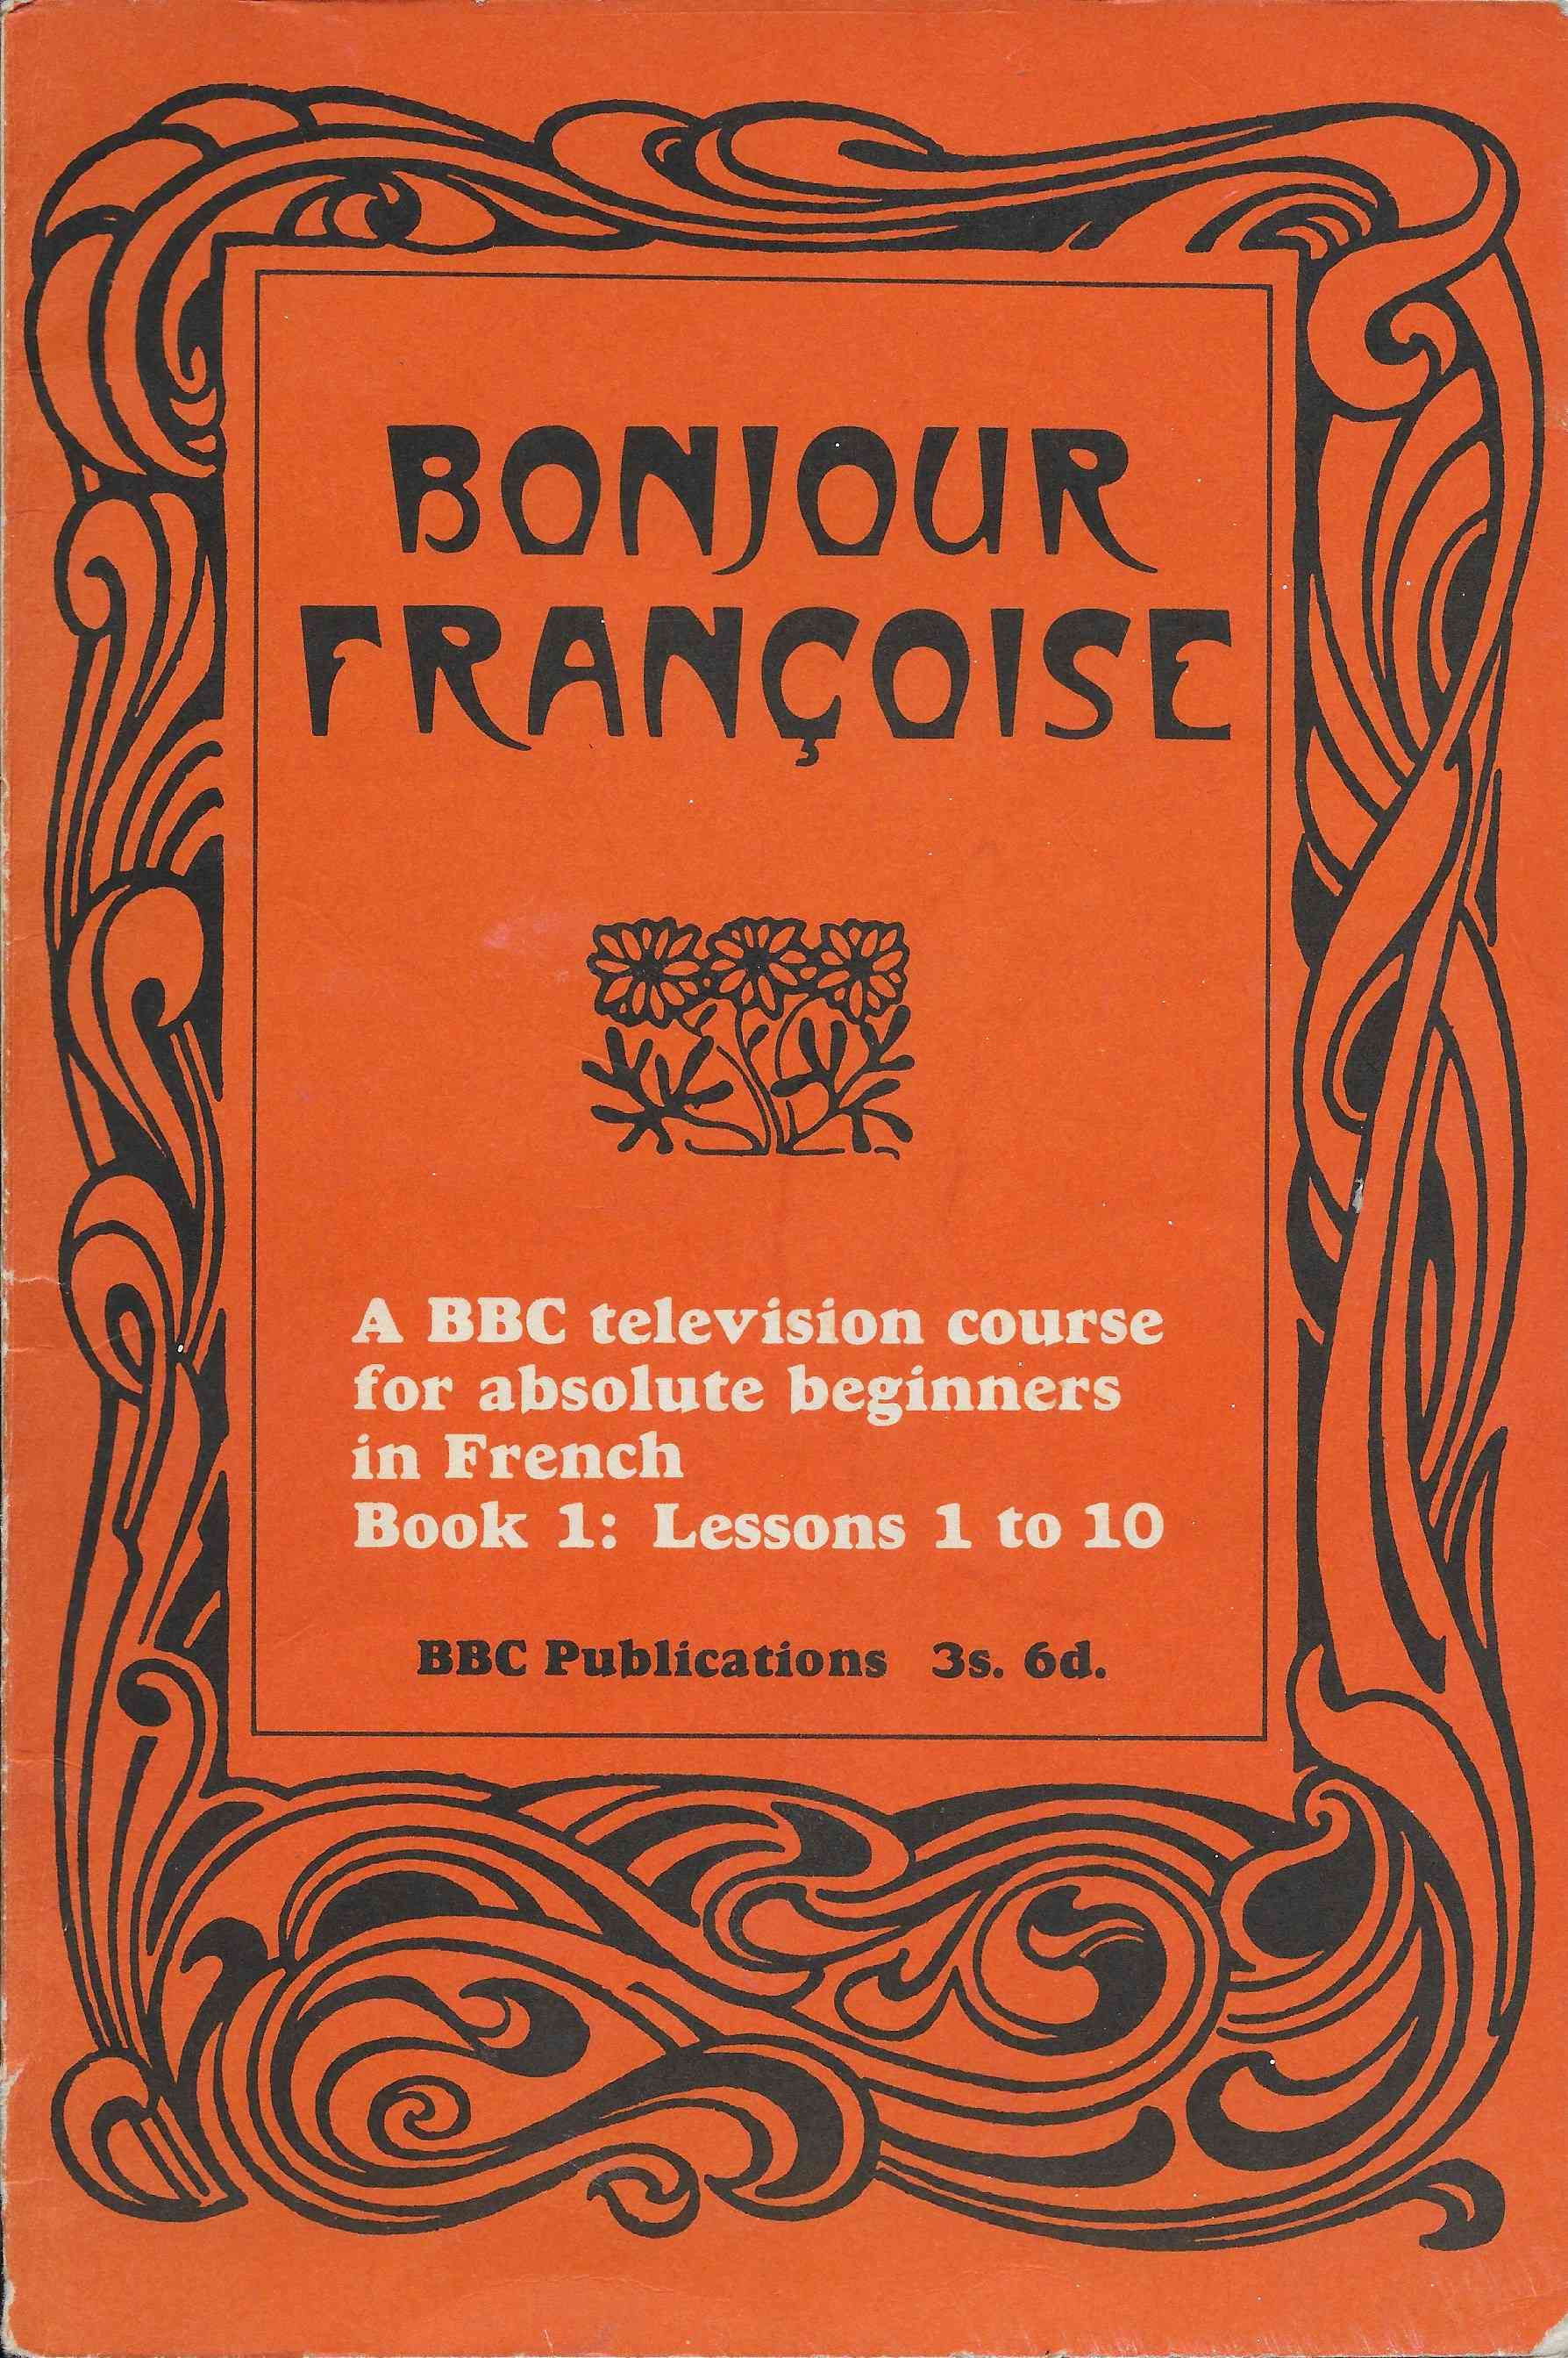 Picture of Bonjour Francoise - Book 1 by artist Michel Faure from the BBC books - Records and Tapes library